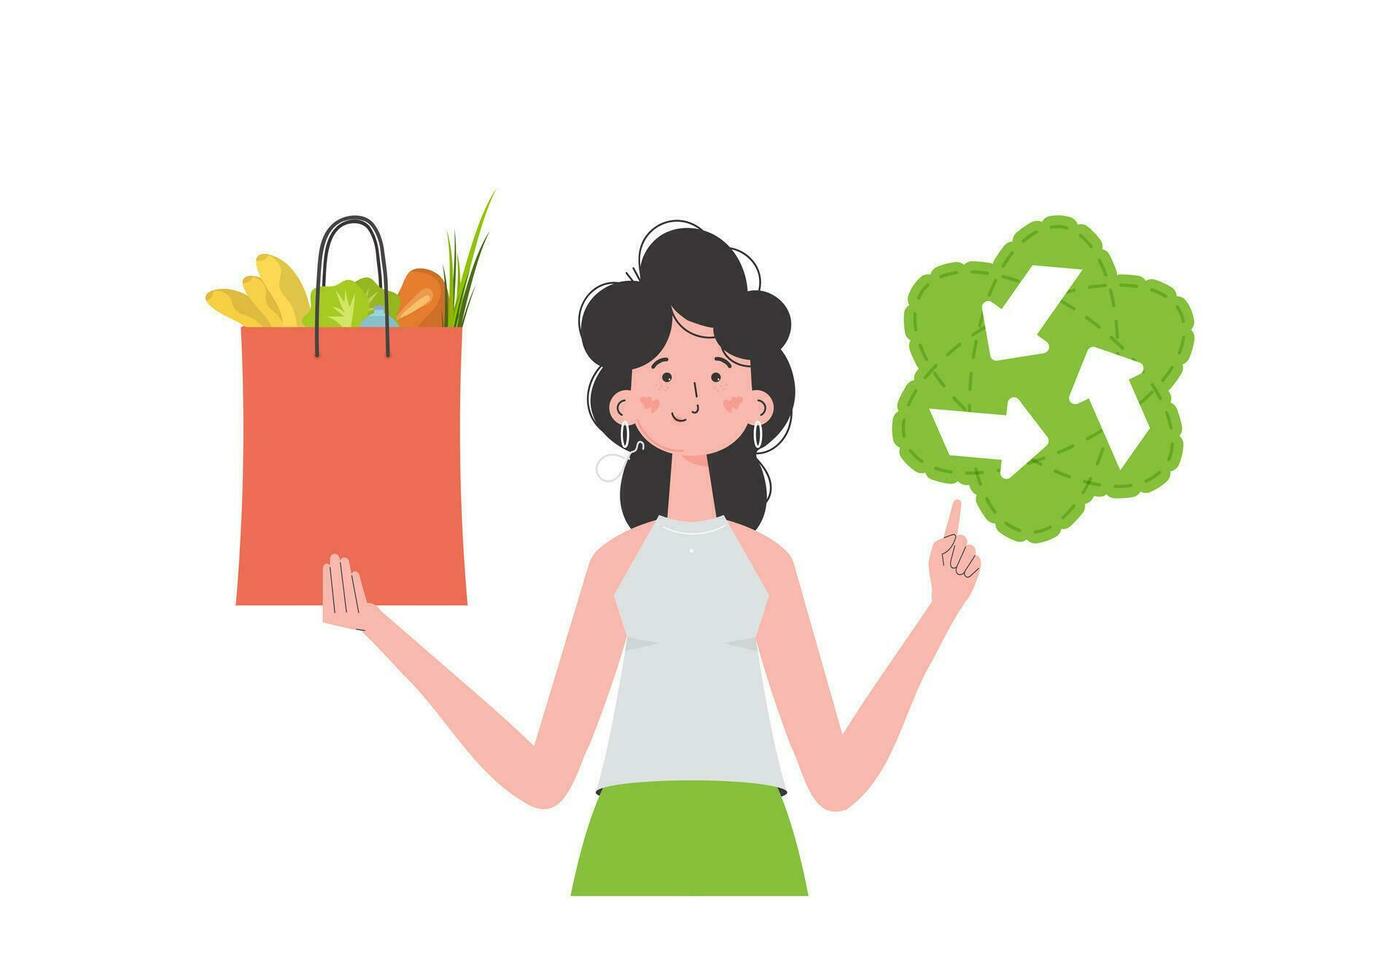 The woman is shown waist-deep and holding a bag of healthy food in her hands and showing the EKO icon. Isolated. Trend vector illustration.